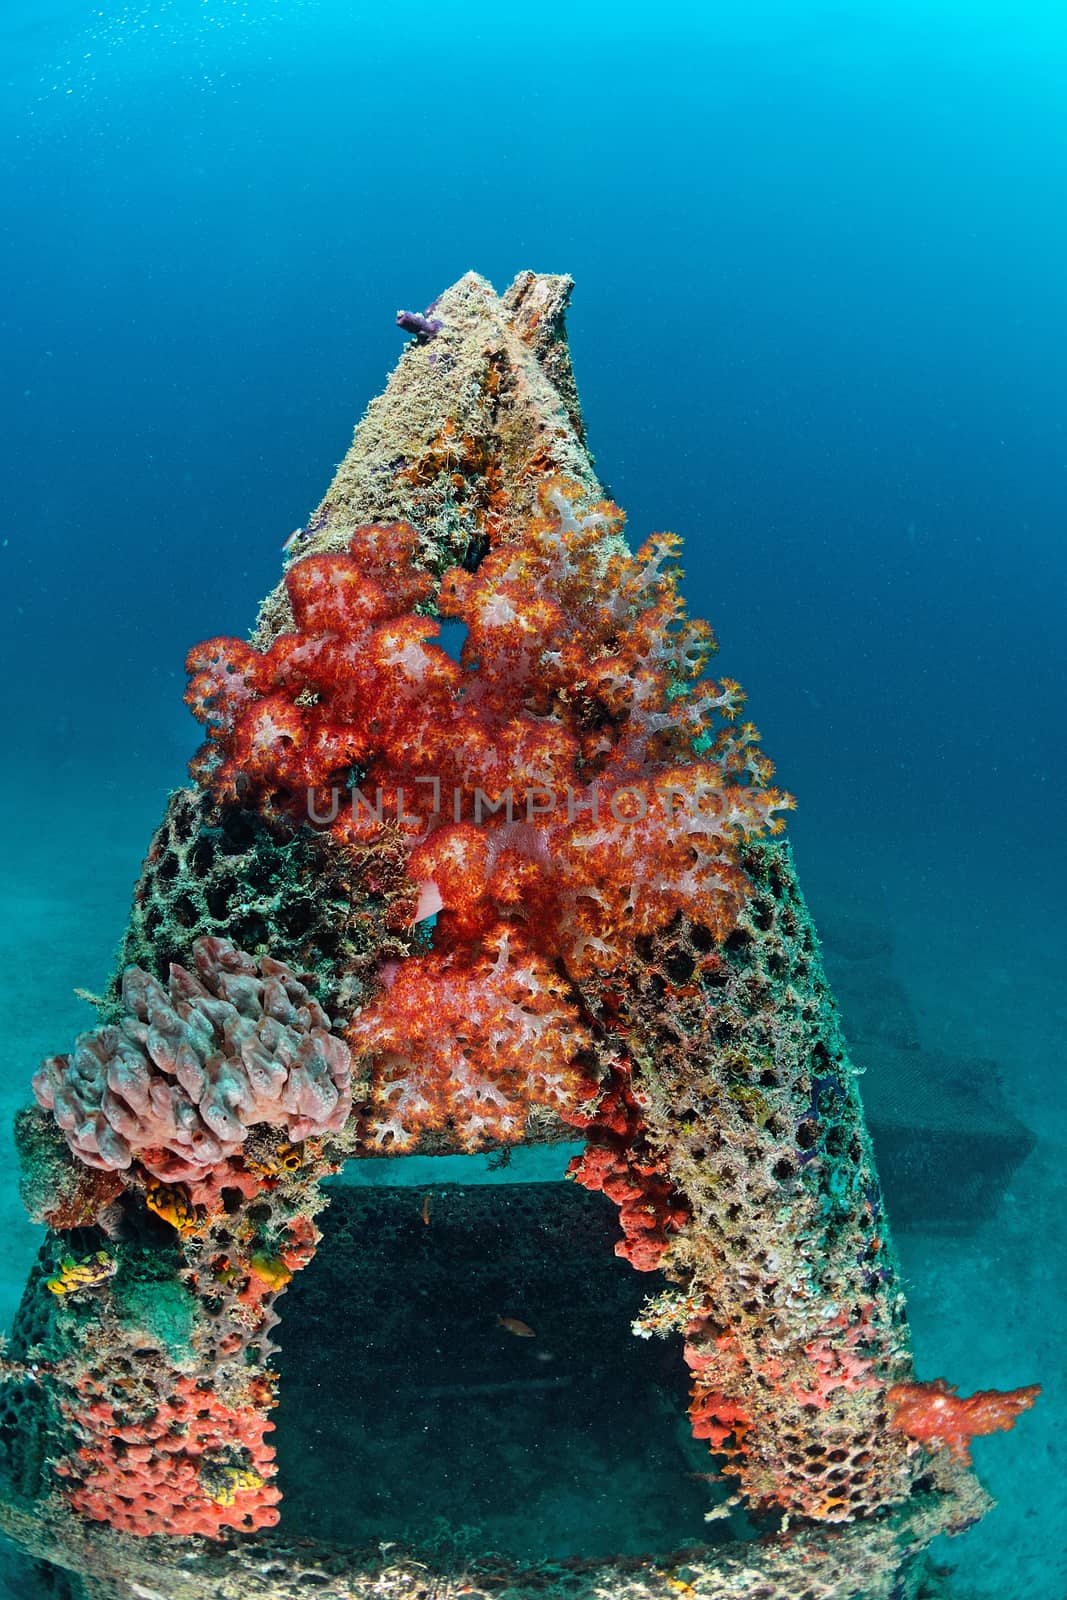 Softcoral on artificial reef in Mabul, kapalai, Malaysia by think4photop